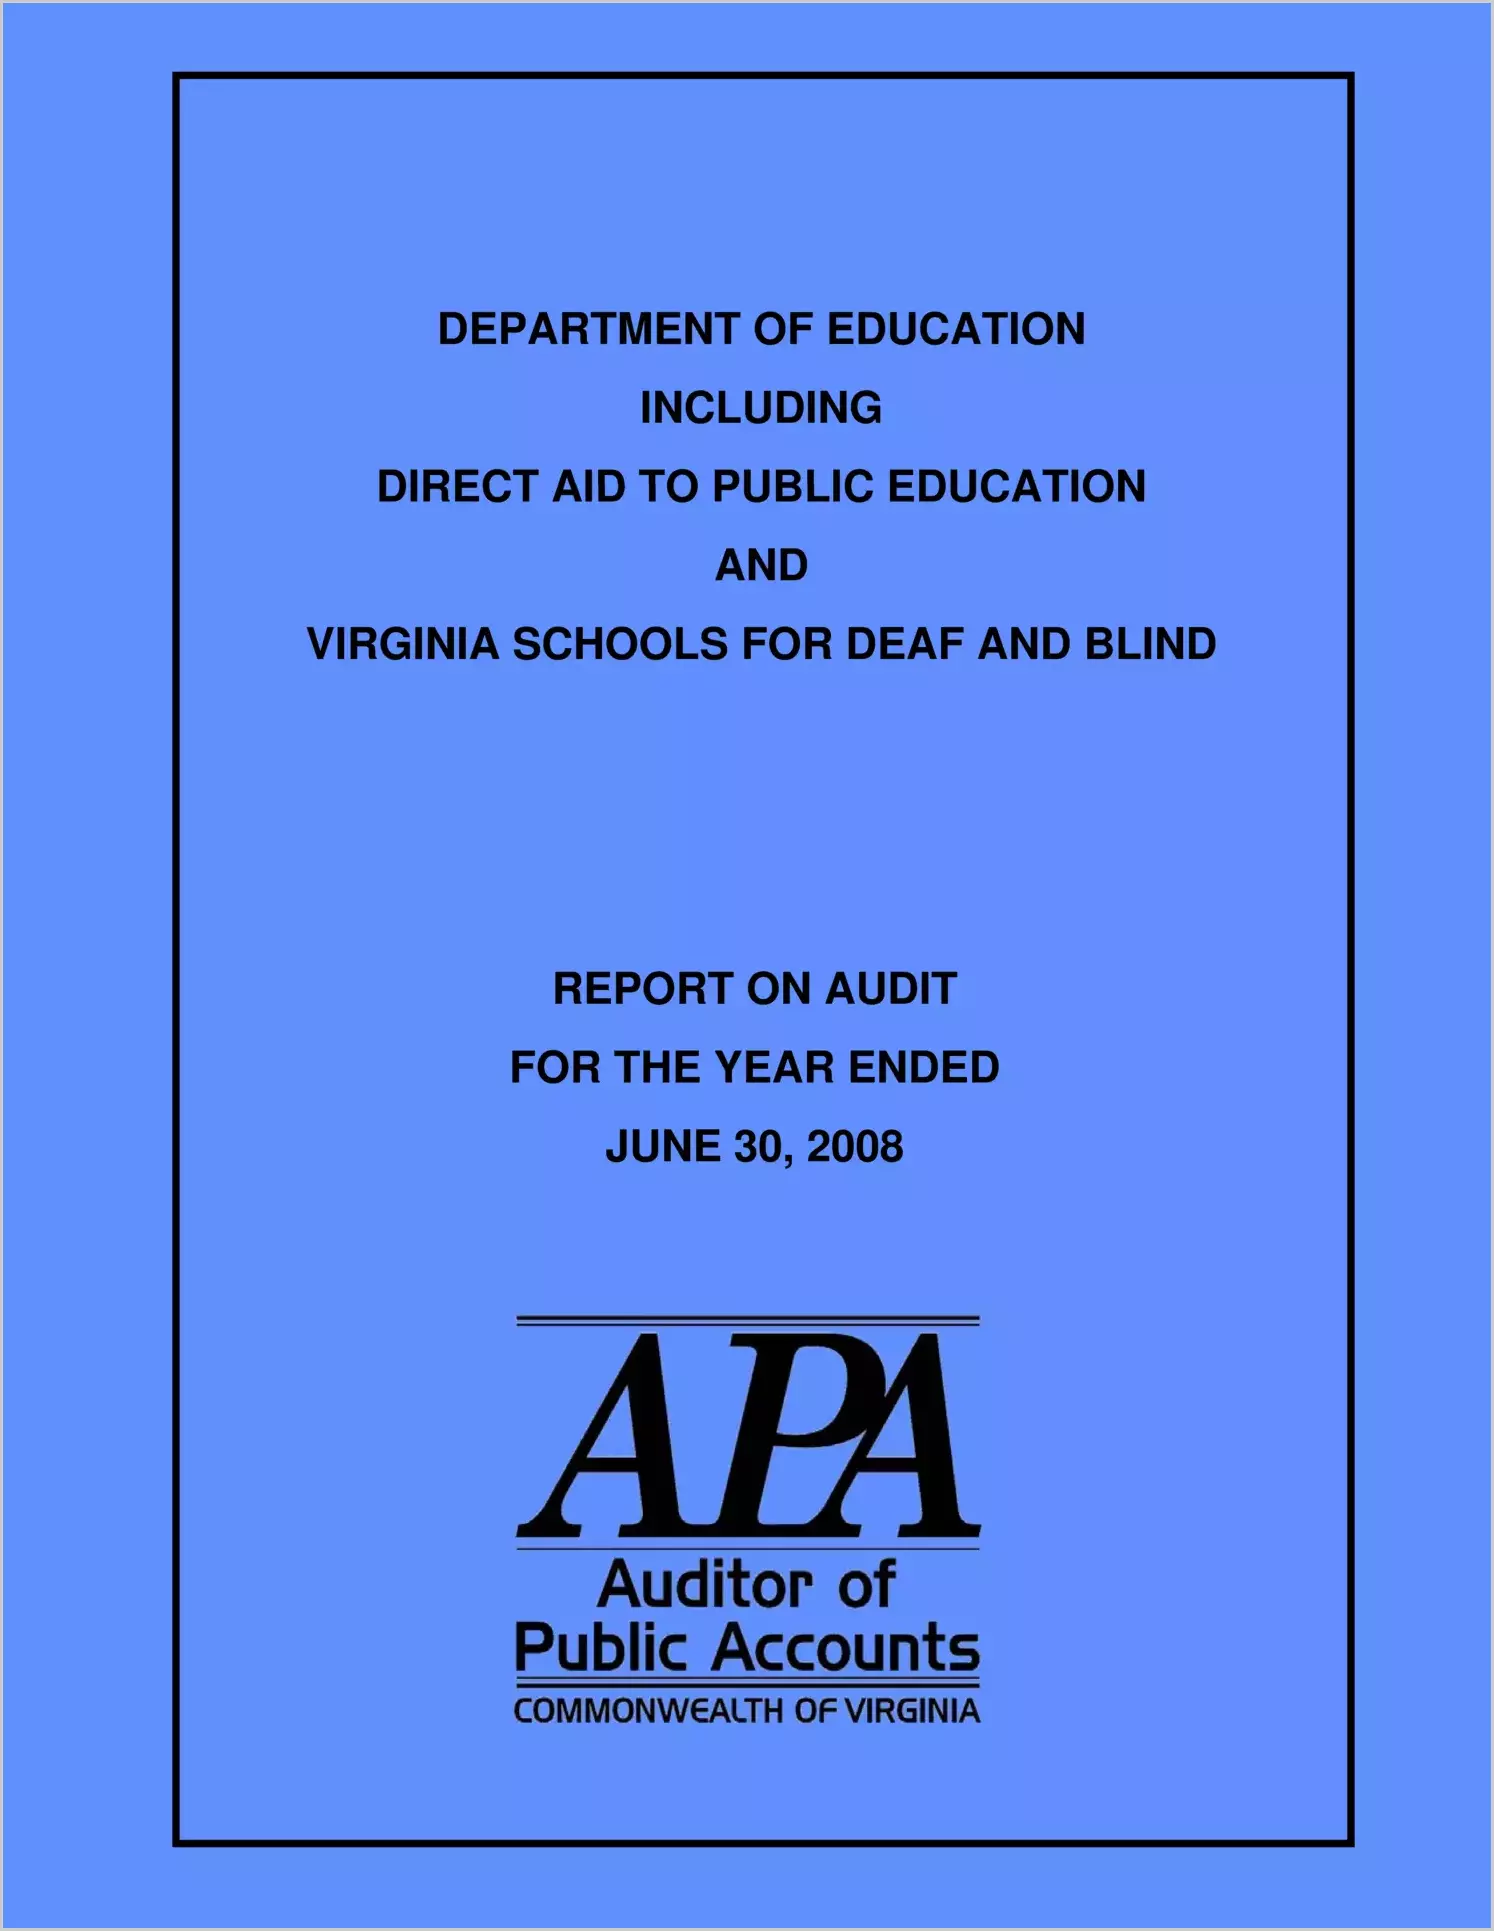 Department of Education Including Direct Aid to Public Education and  Virginia Schools for the Deaf and Blind for the year ended June 30, 2008